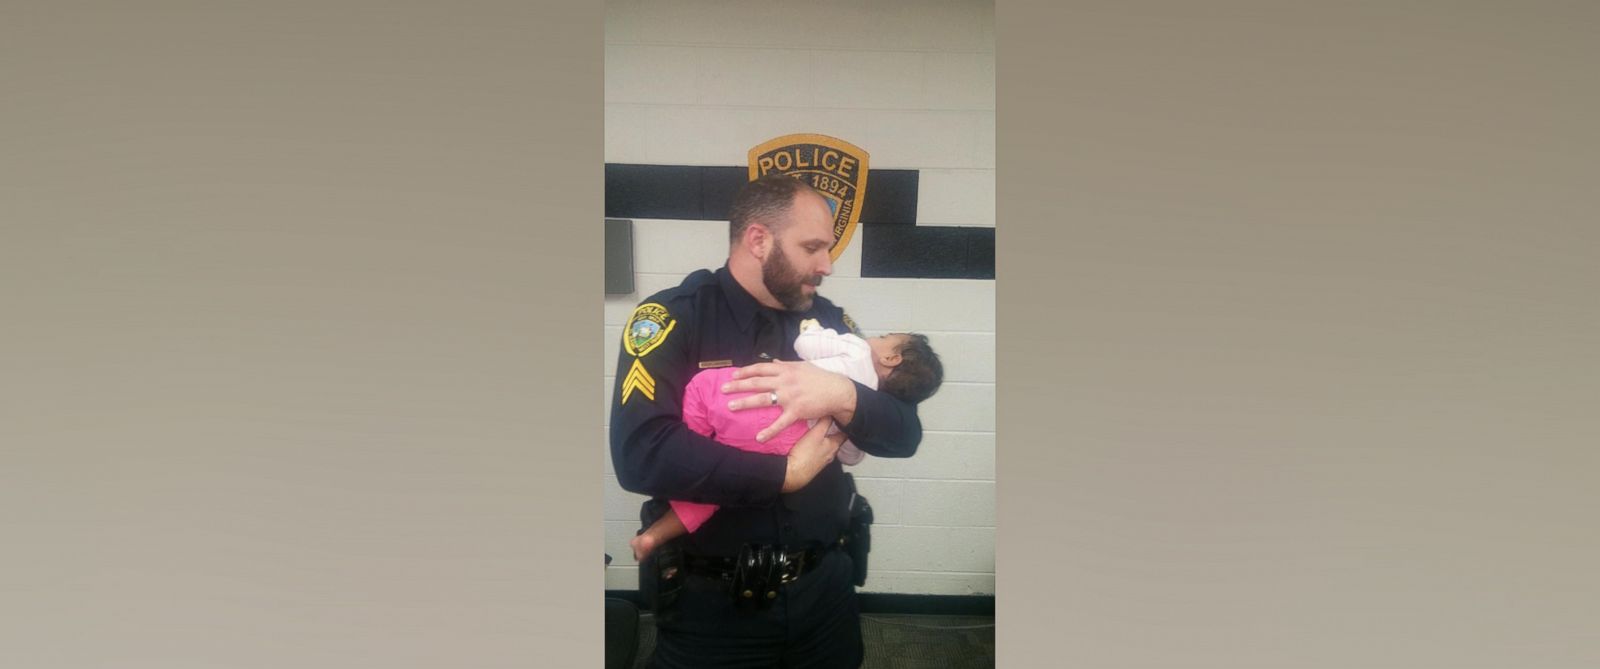 Police Officer Rescues Baby From Grocery Store Bathroom